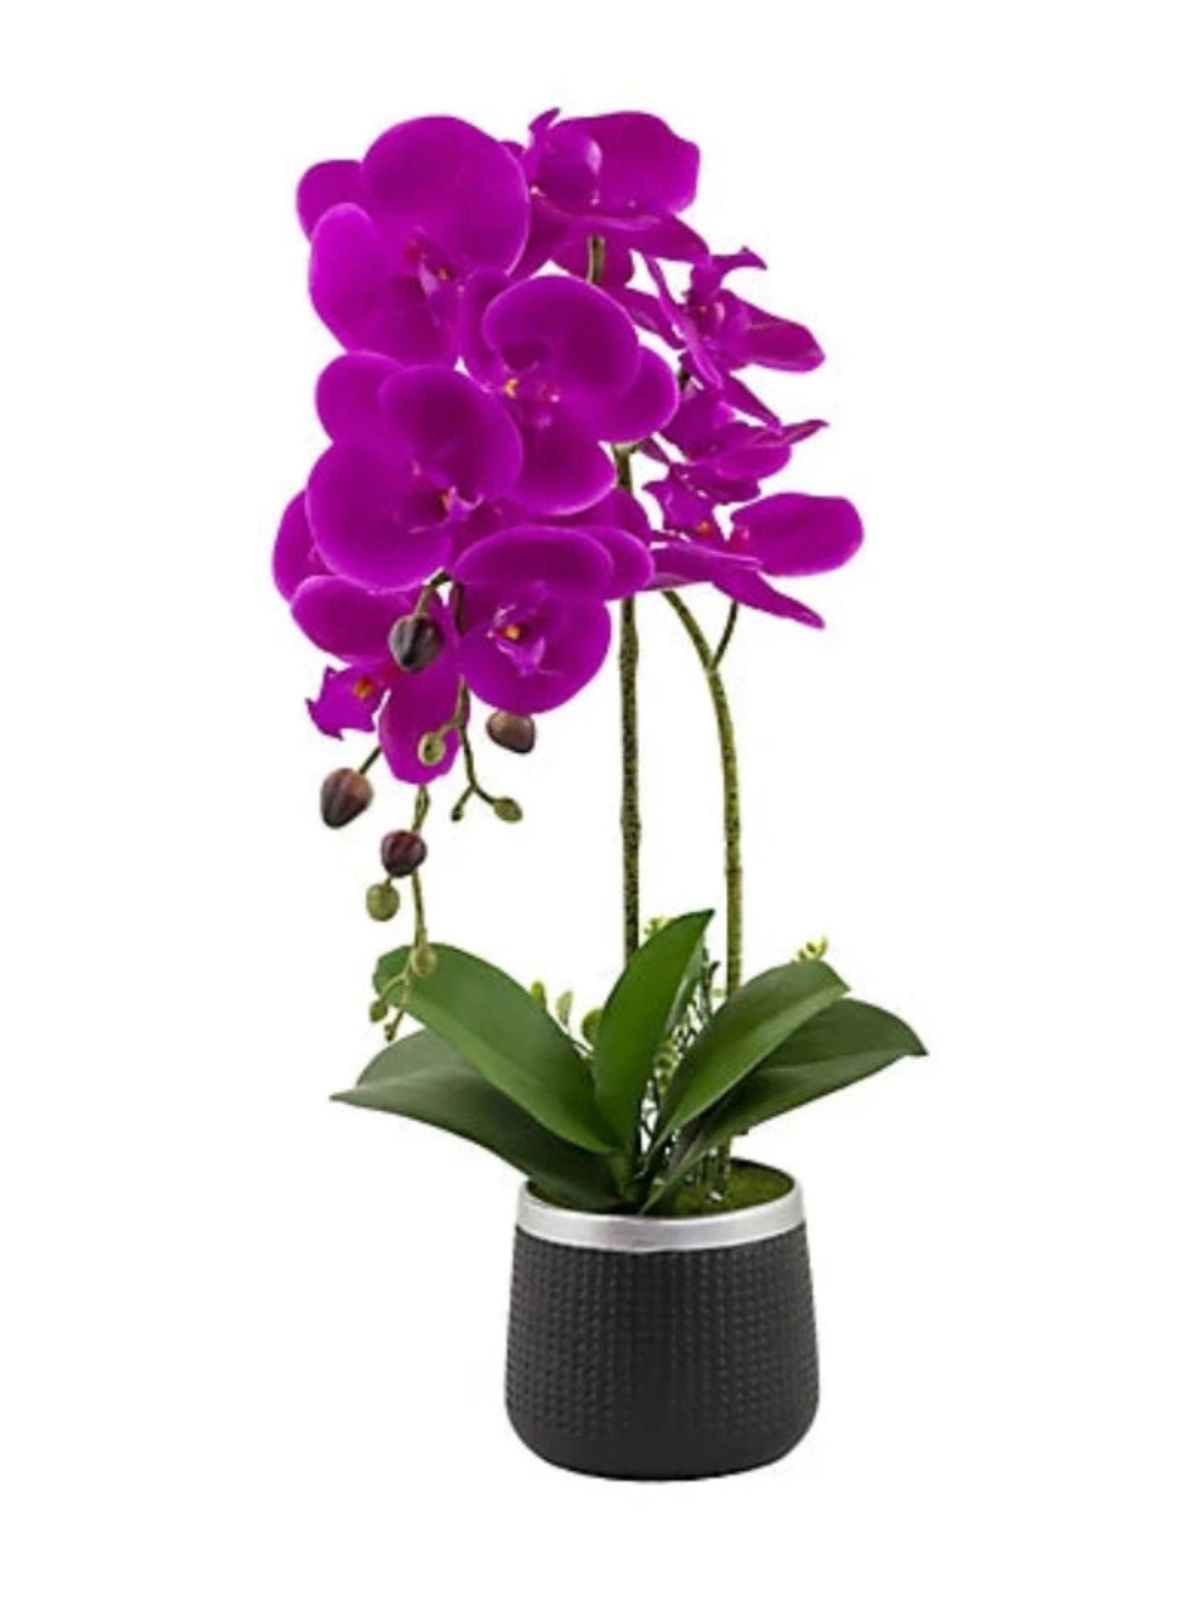 This elegant 21in Magenta Orchid in Ceramic Planter brings a realistic touch of nature to your home or office. . Adds sophisticated beauty and grace to any setting. 